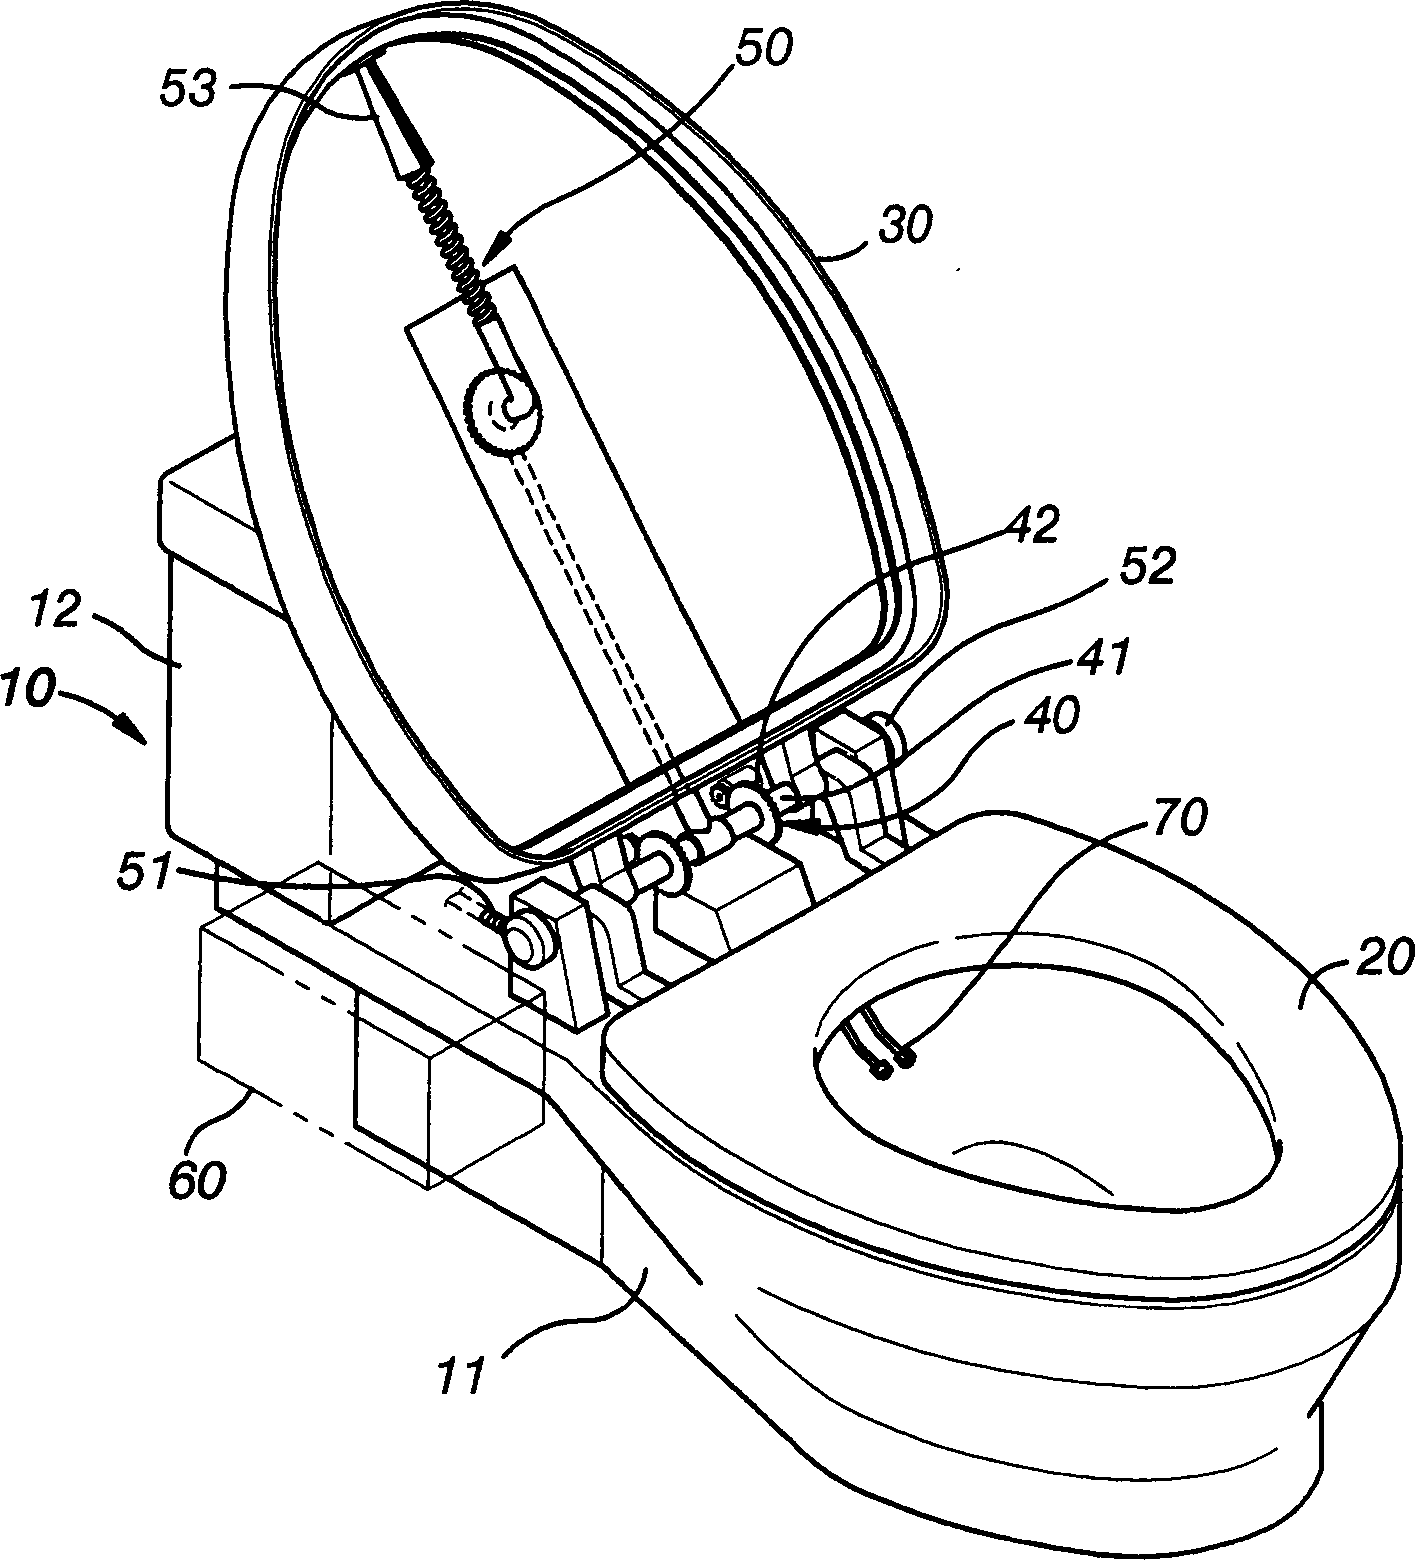 Automatic flushing device for toilet